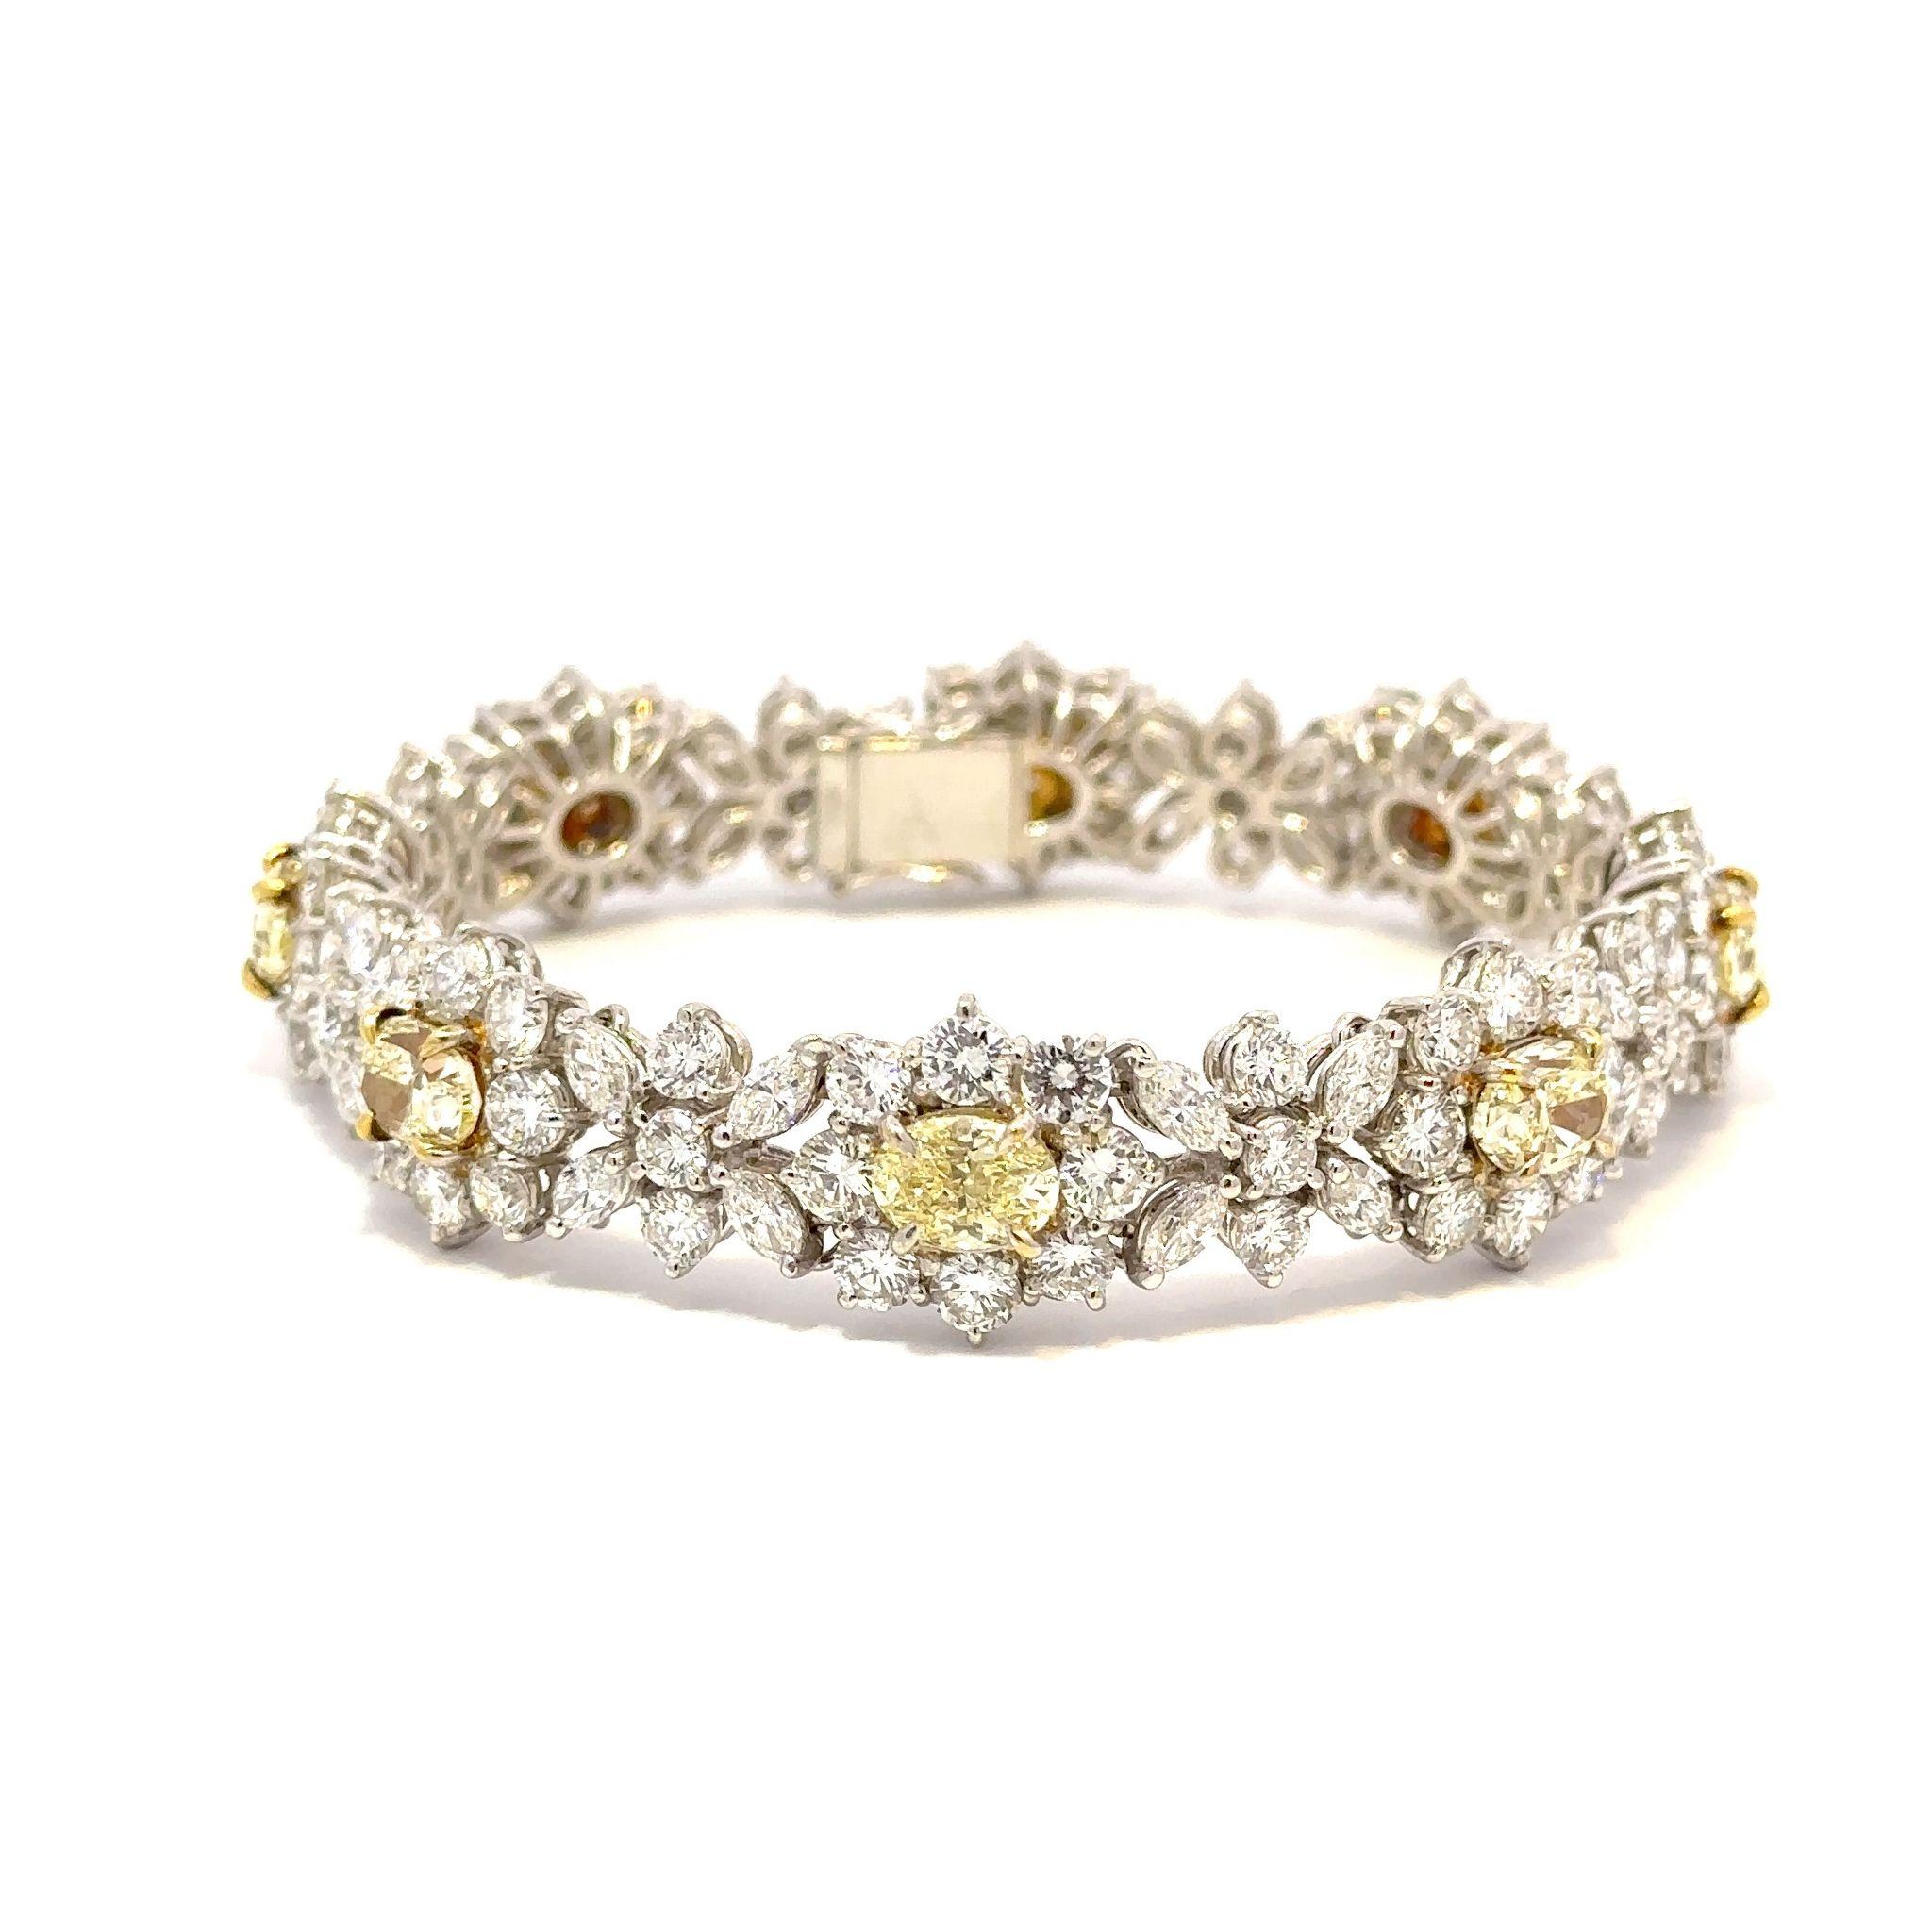 Bracelet composed of platinum featuring yellow and white diamonds. There are approximately 16.50 carats of round and marquise shaped white diamonds and 8.39 carats of oval shaped yellow diamonds.  All eight of the yellow diamonds are accompanied by